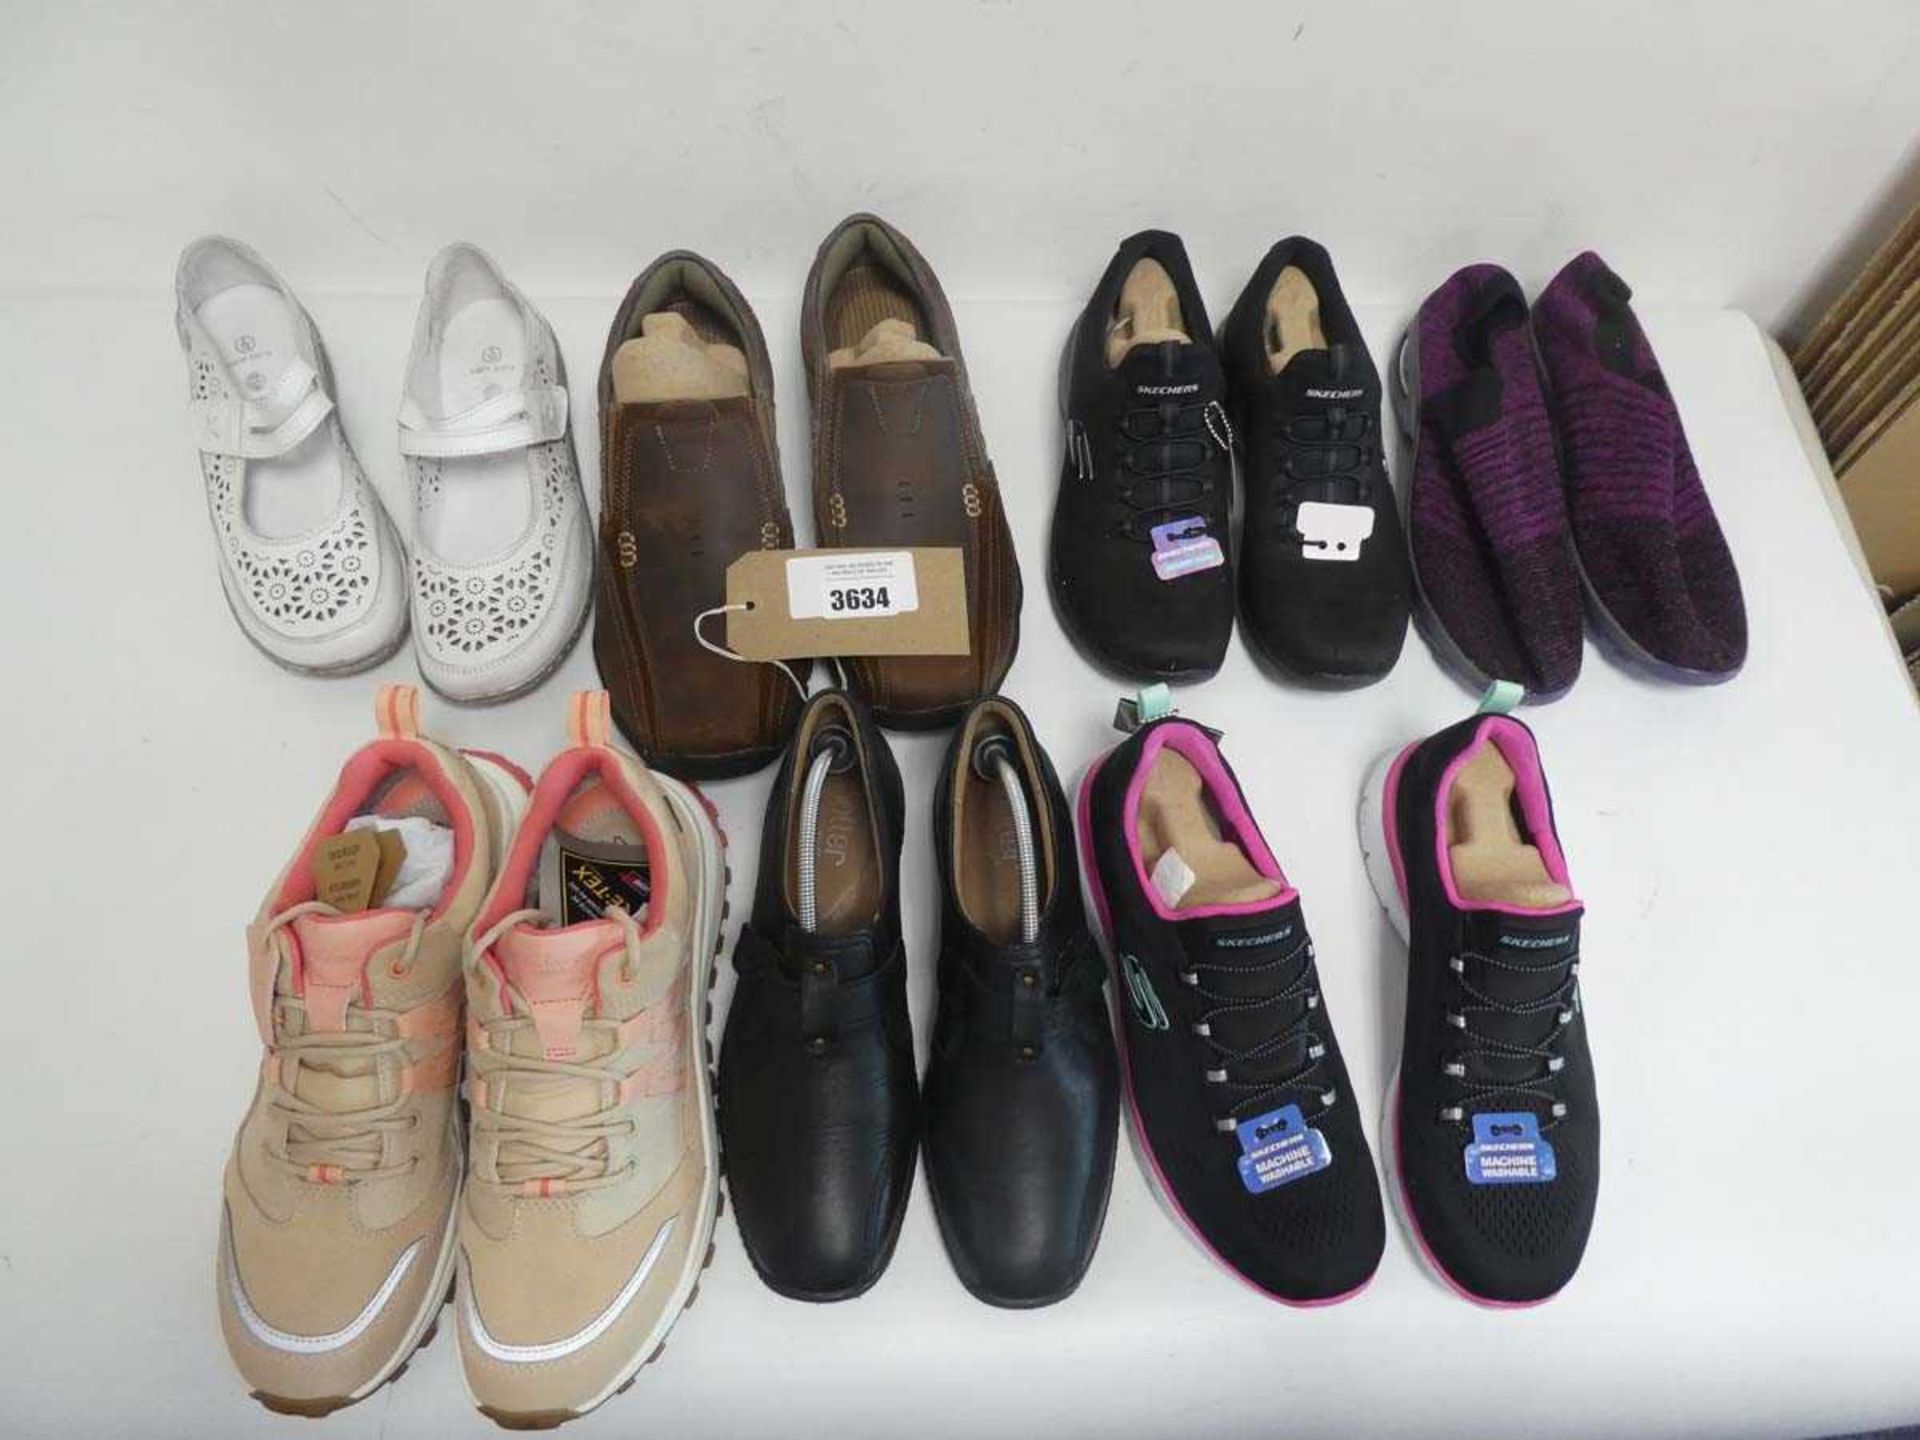 +VAT 7 pairs of trainers/shoes in various styles and sizes to include sketchers/clarks etc